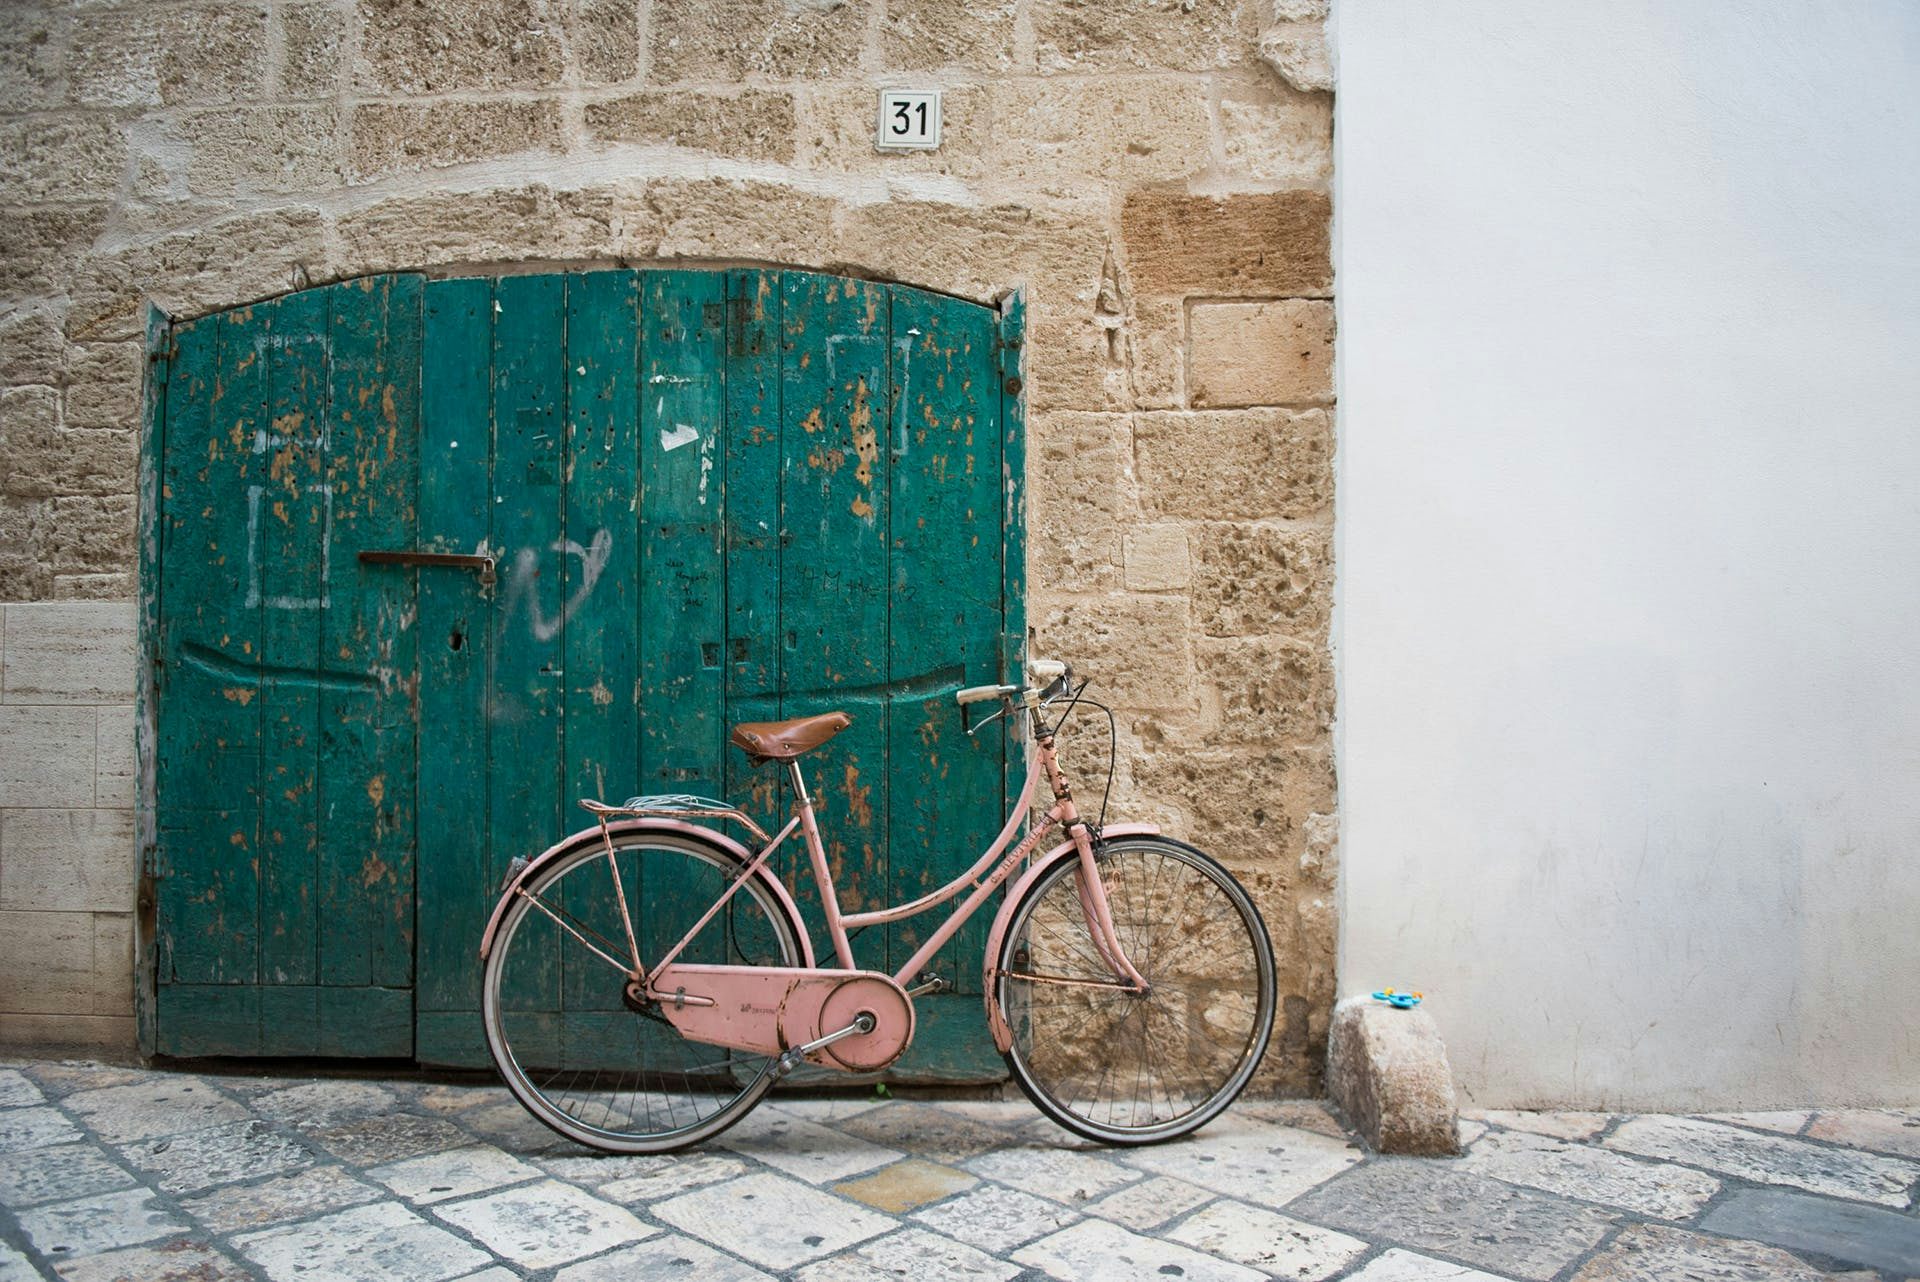 Pink bicycle in front of a door in Italy.